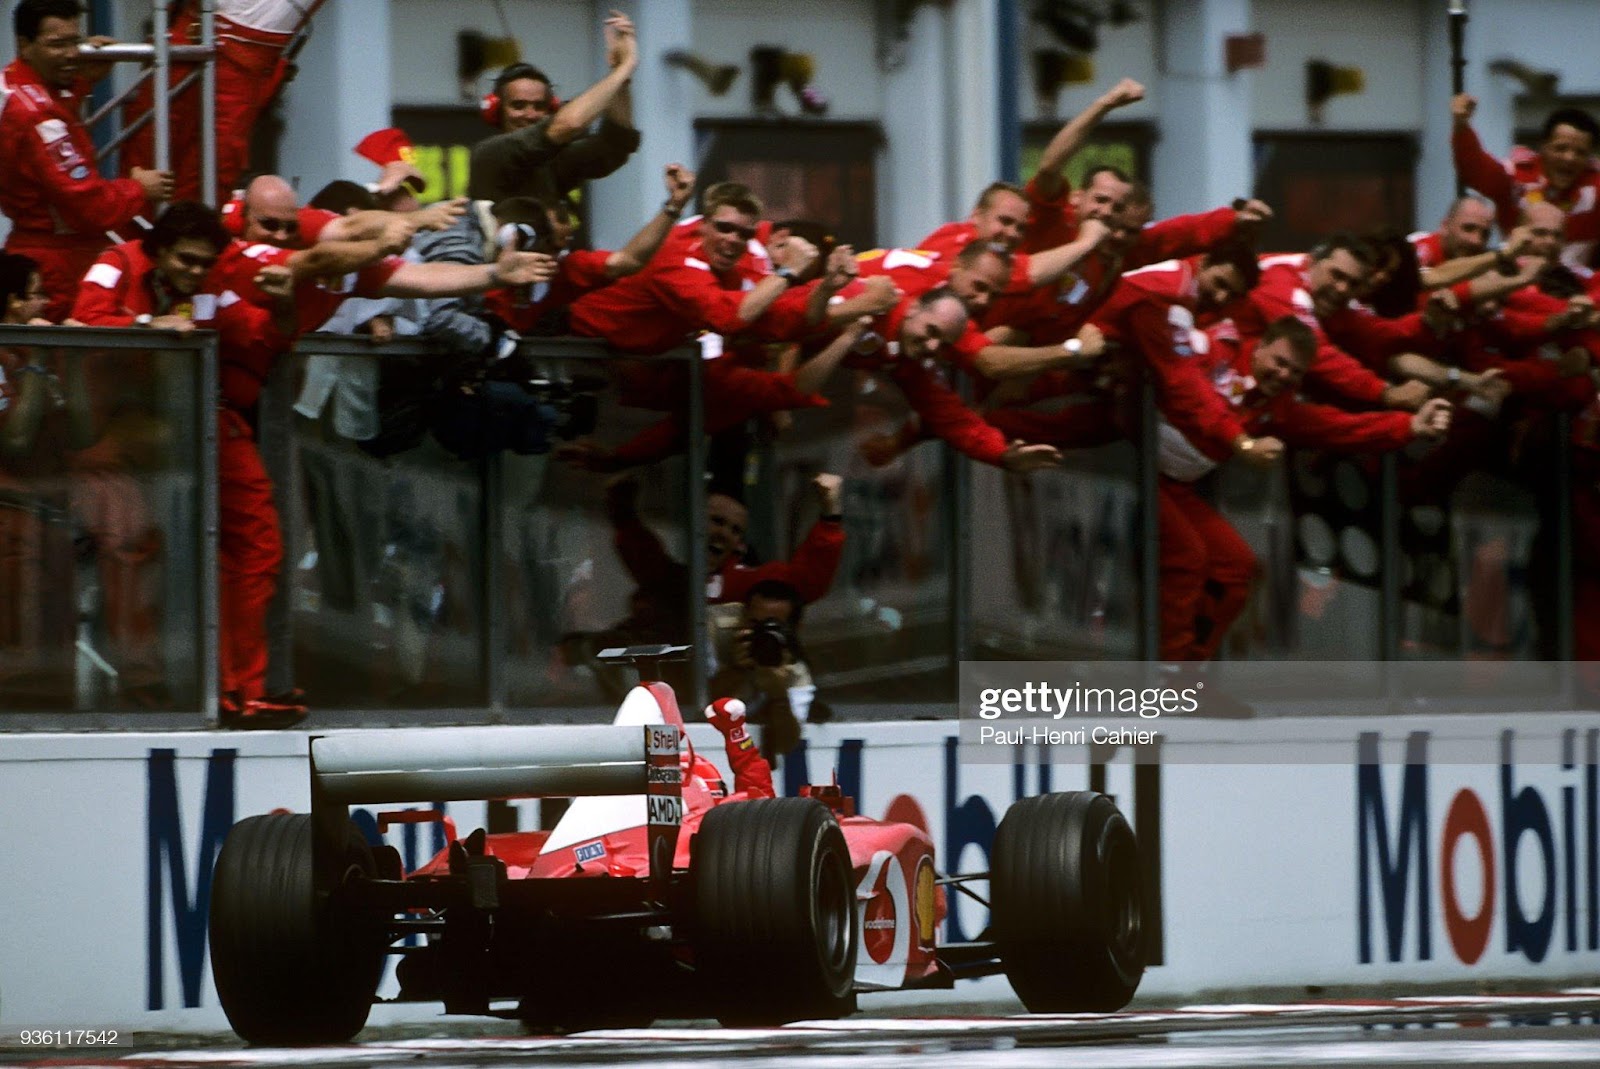 Michael Schumacher, Ferrari F2002, claims victory in the Grand Prix of France, Circuit de Nevers Magny-Cours, 21 July 2002. 